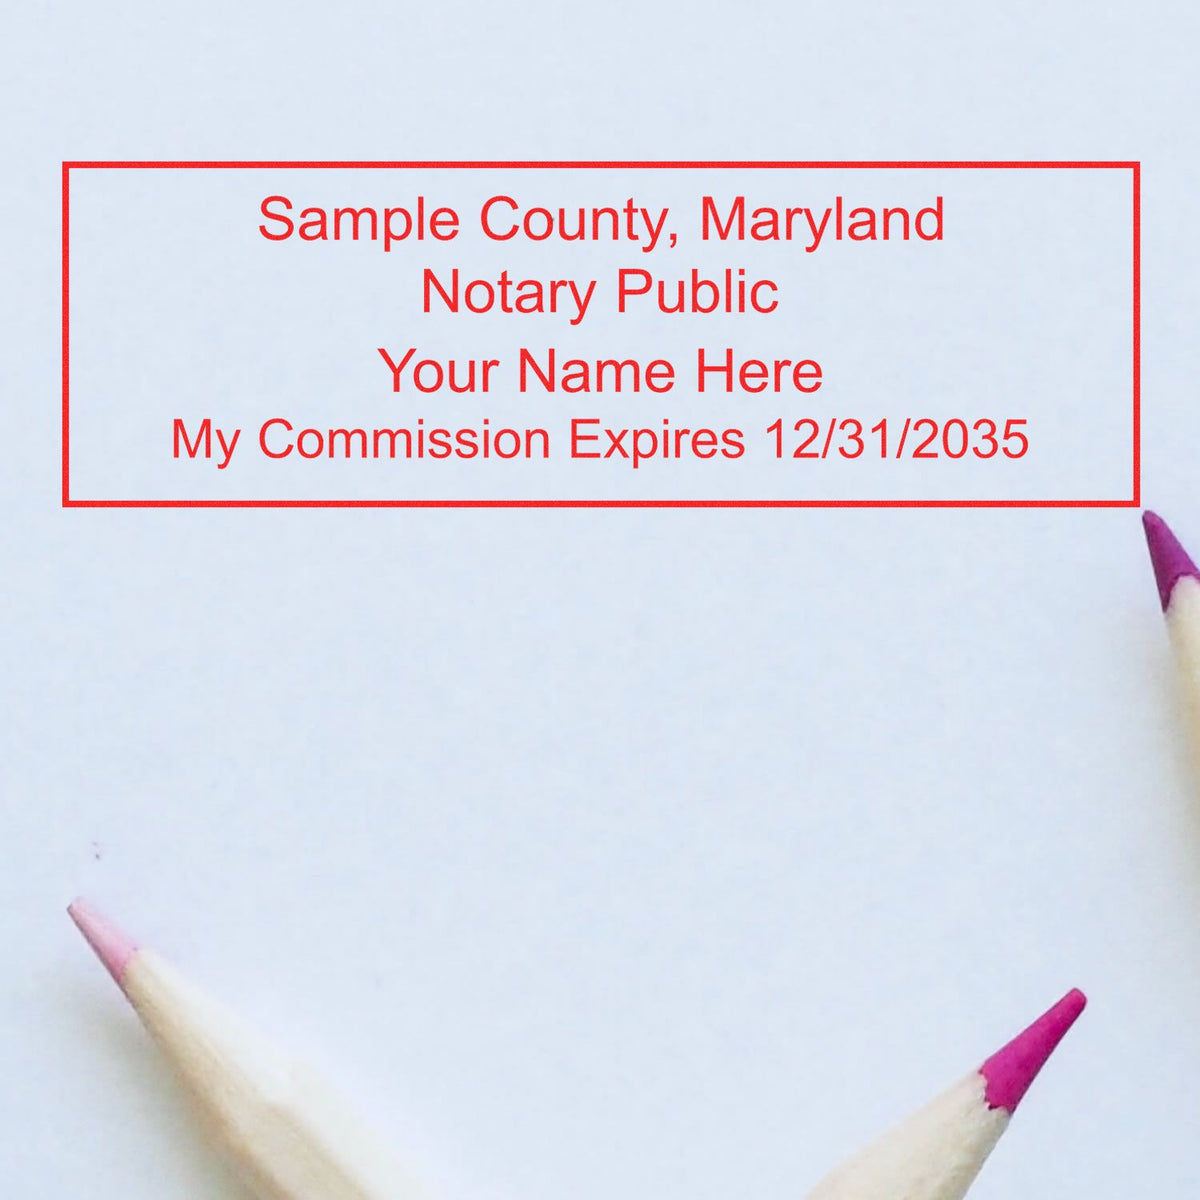 An alternative view of the Slim Pre-Inked Rectangular Notary Stamp for Maryland stamped on a sheet of paper showing the image in use